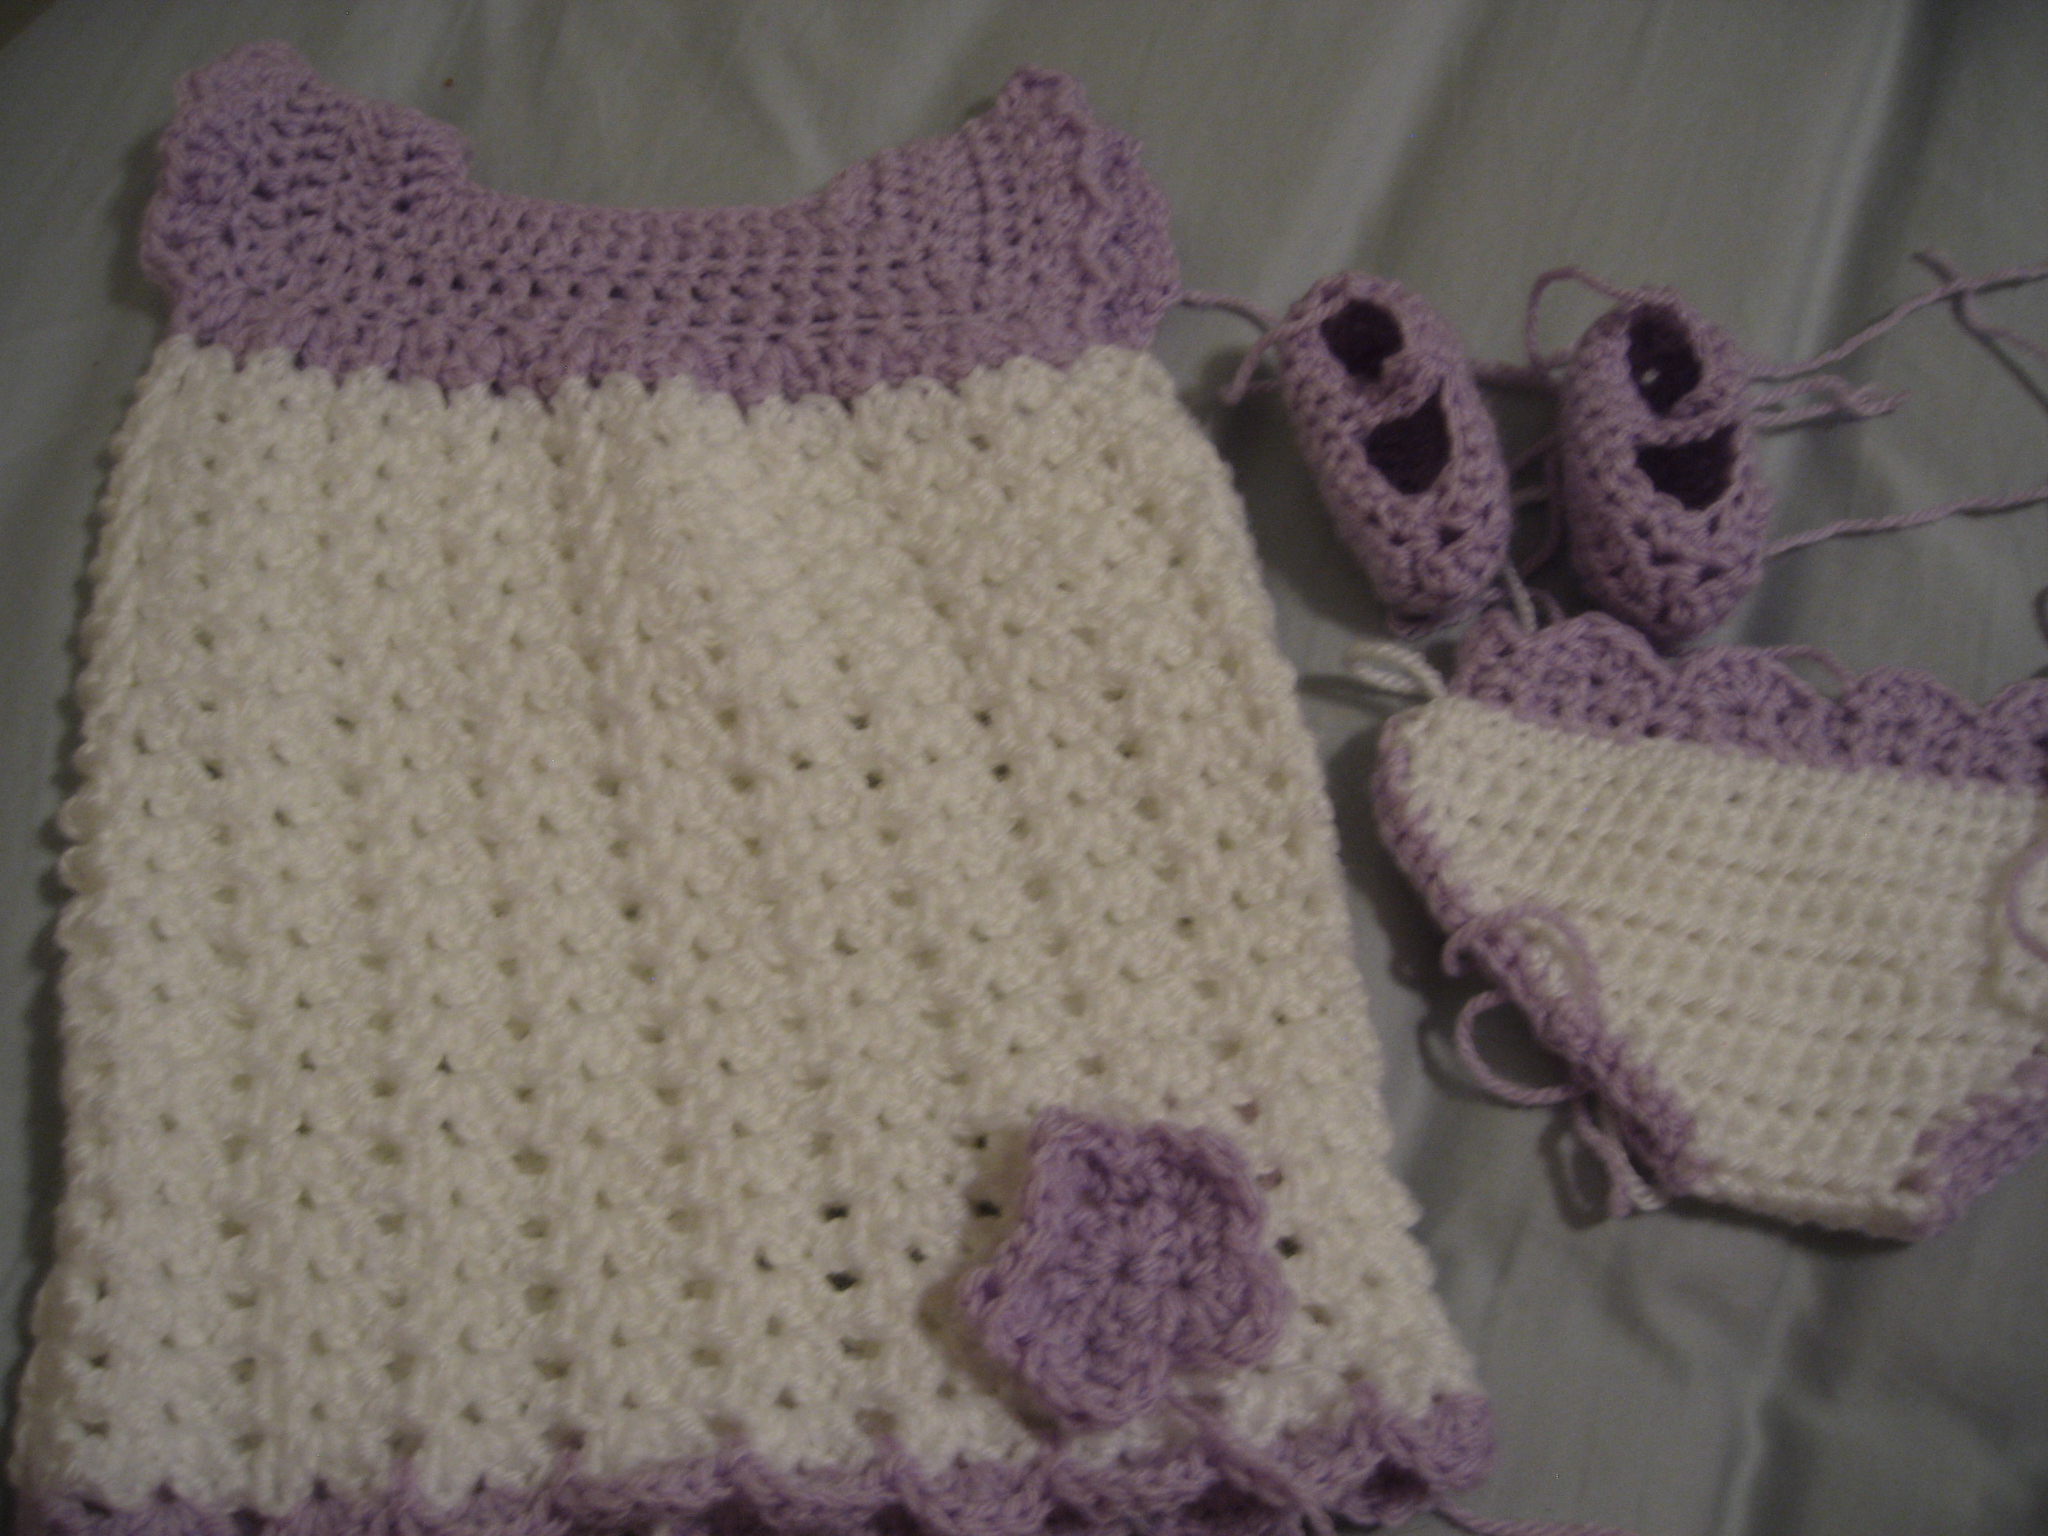 Crochet Pattern Central - Free Baby Dresses And Gowns Crochet